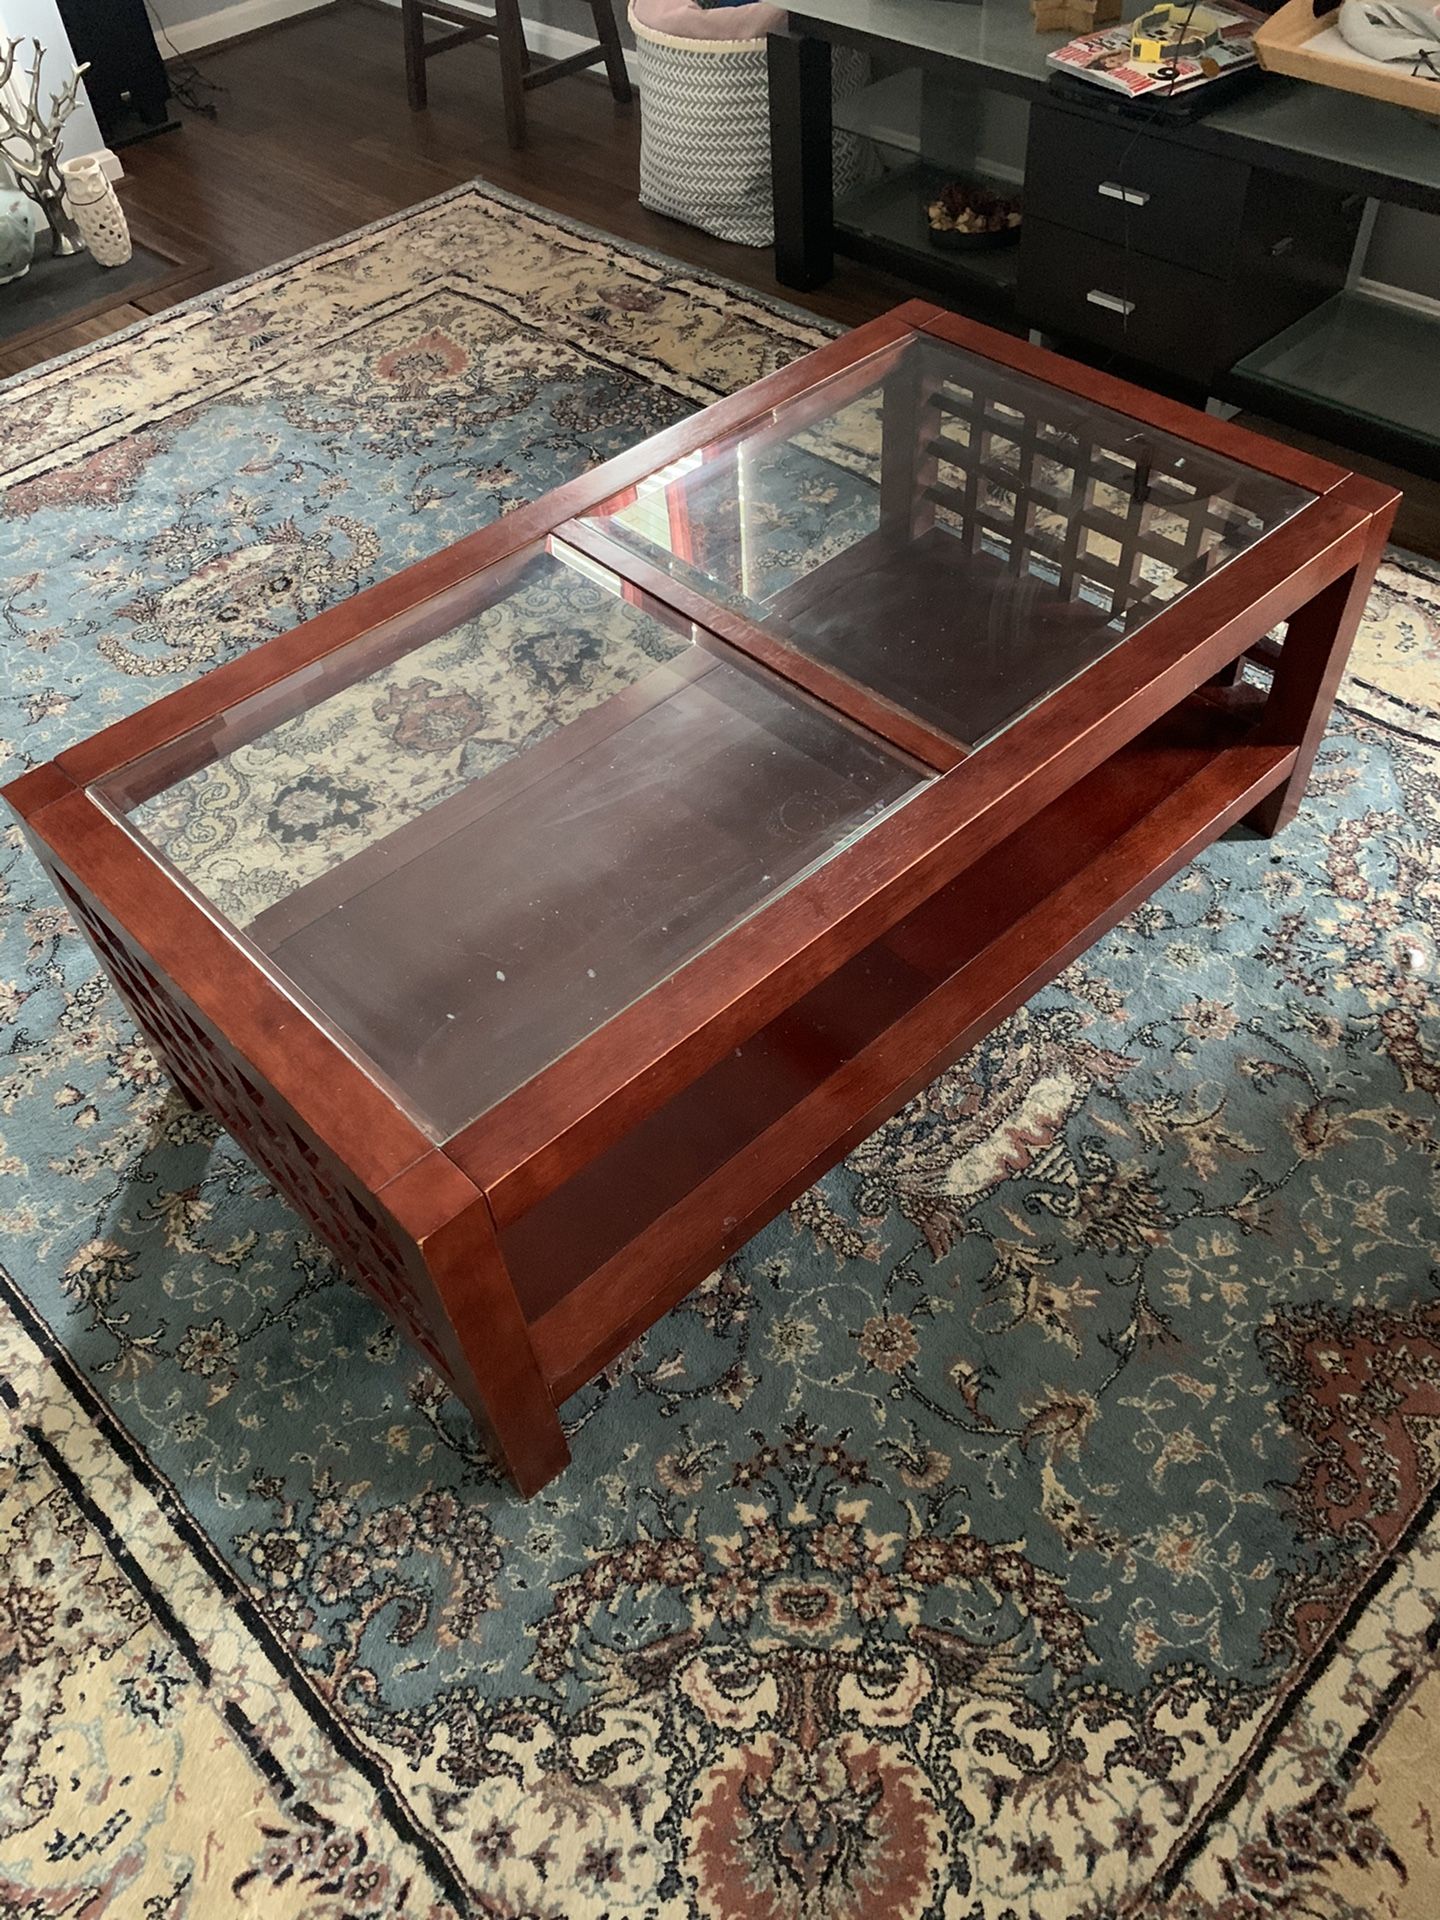 3Pc Geometric Style Wood and Glass Coffee and End Tables. Free, just need to pick up